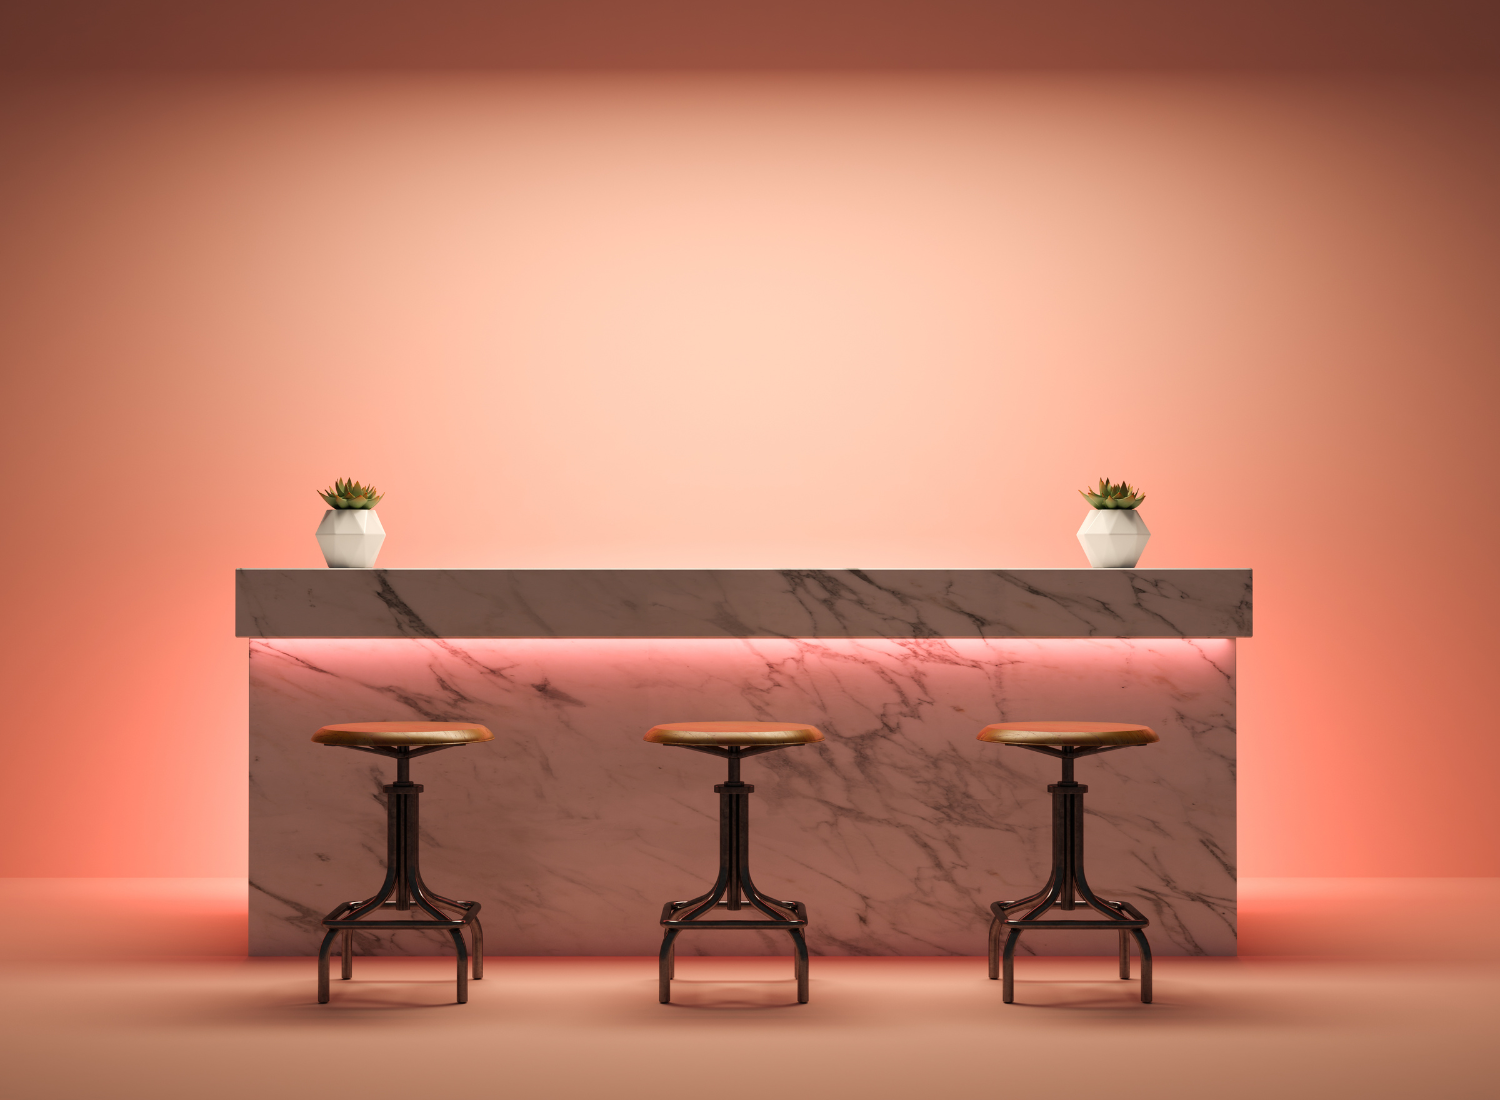 3 chairs at marble counter 2 green decorum salmon backlight warm 